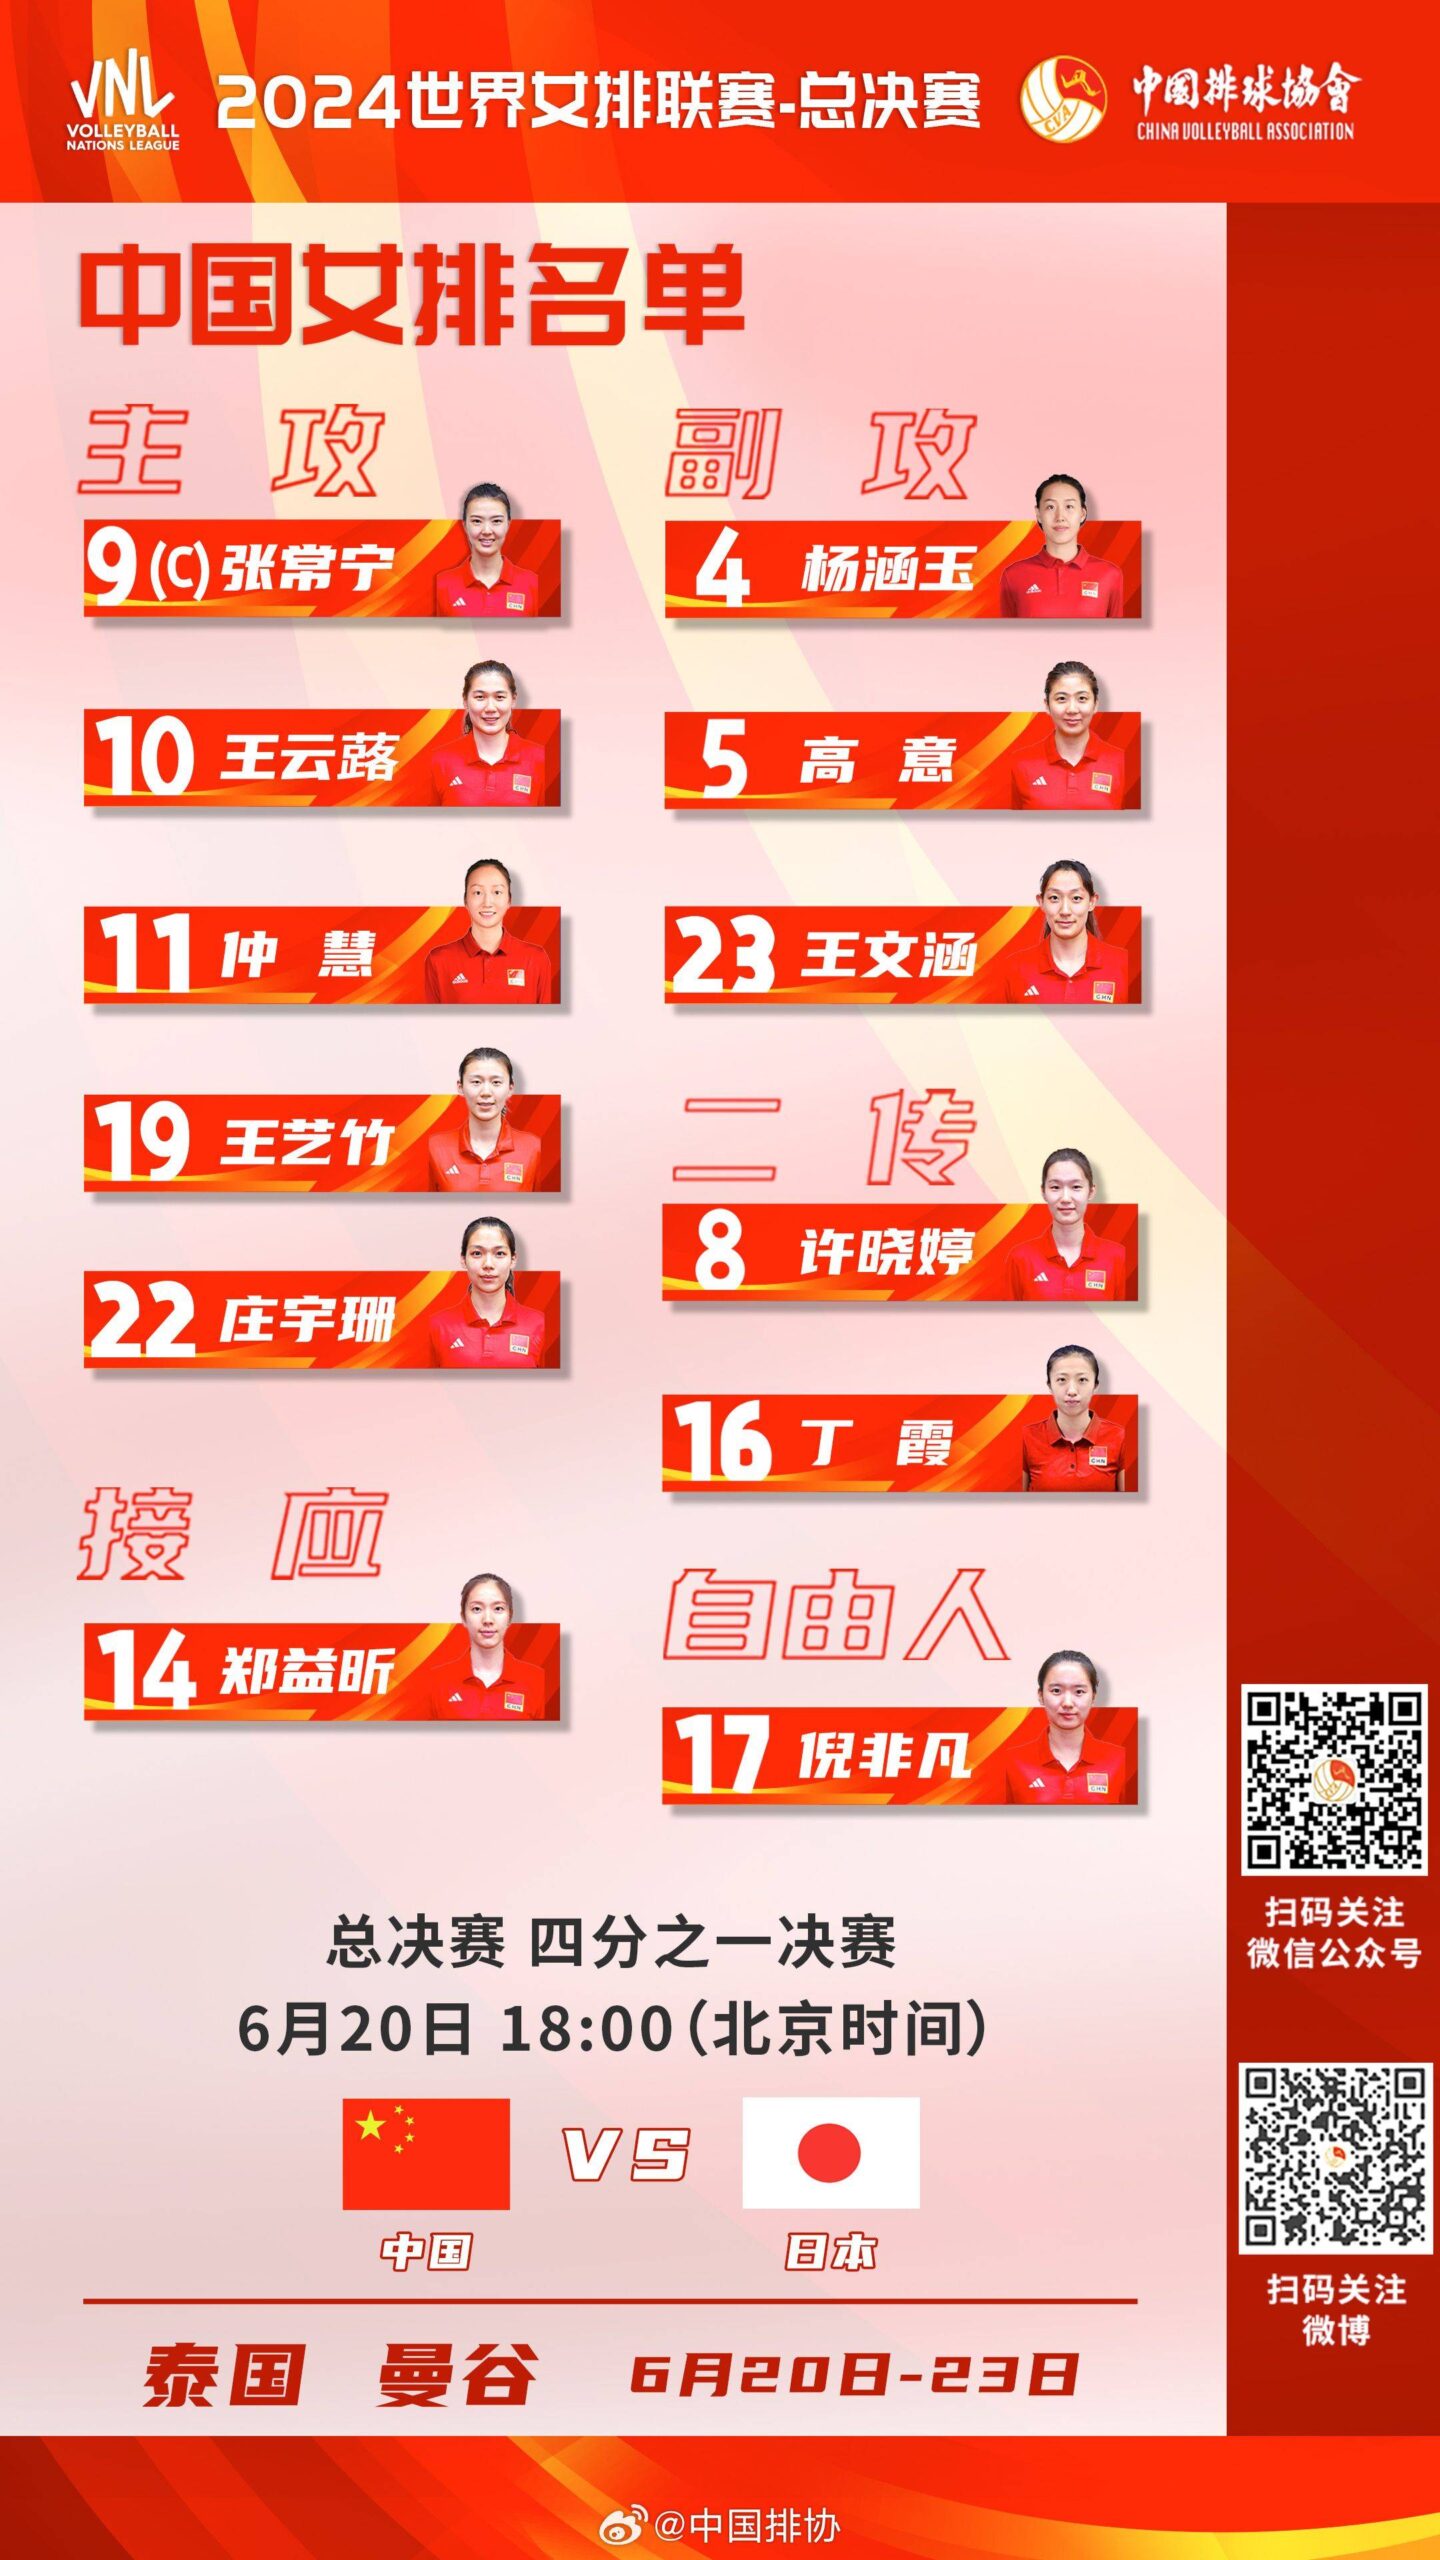 Preparing for the Olympics! Chinese Volleyball Team Announces World League Finals Squad: Led by Zhang Changning, with Ding Xia on the List